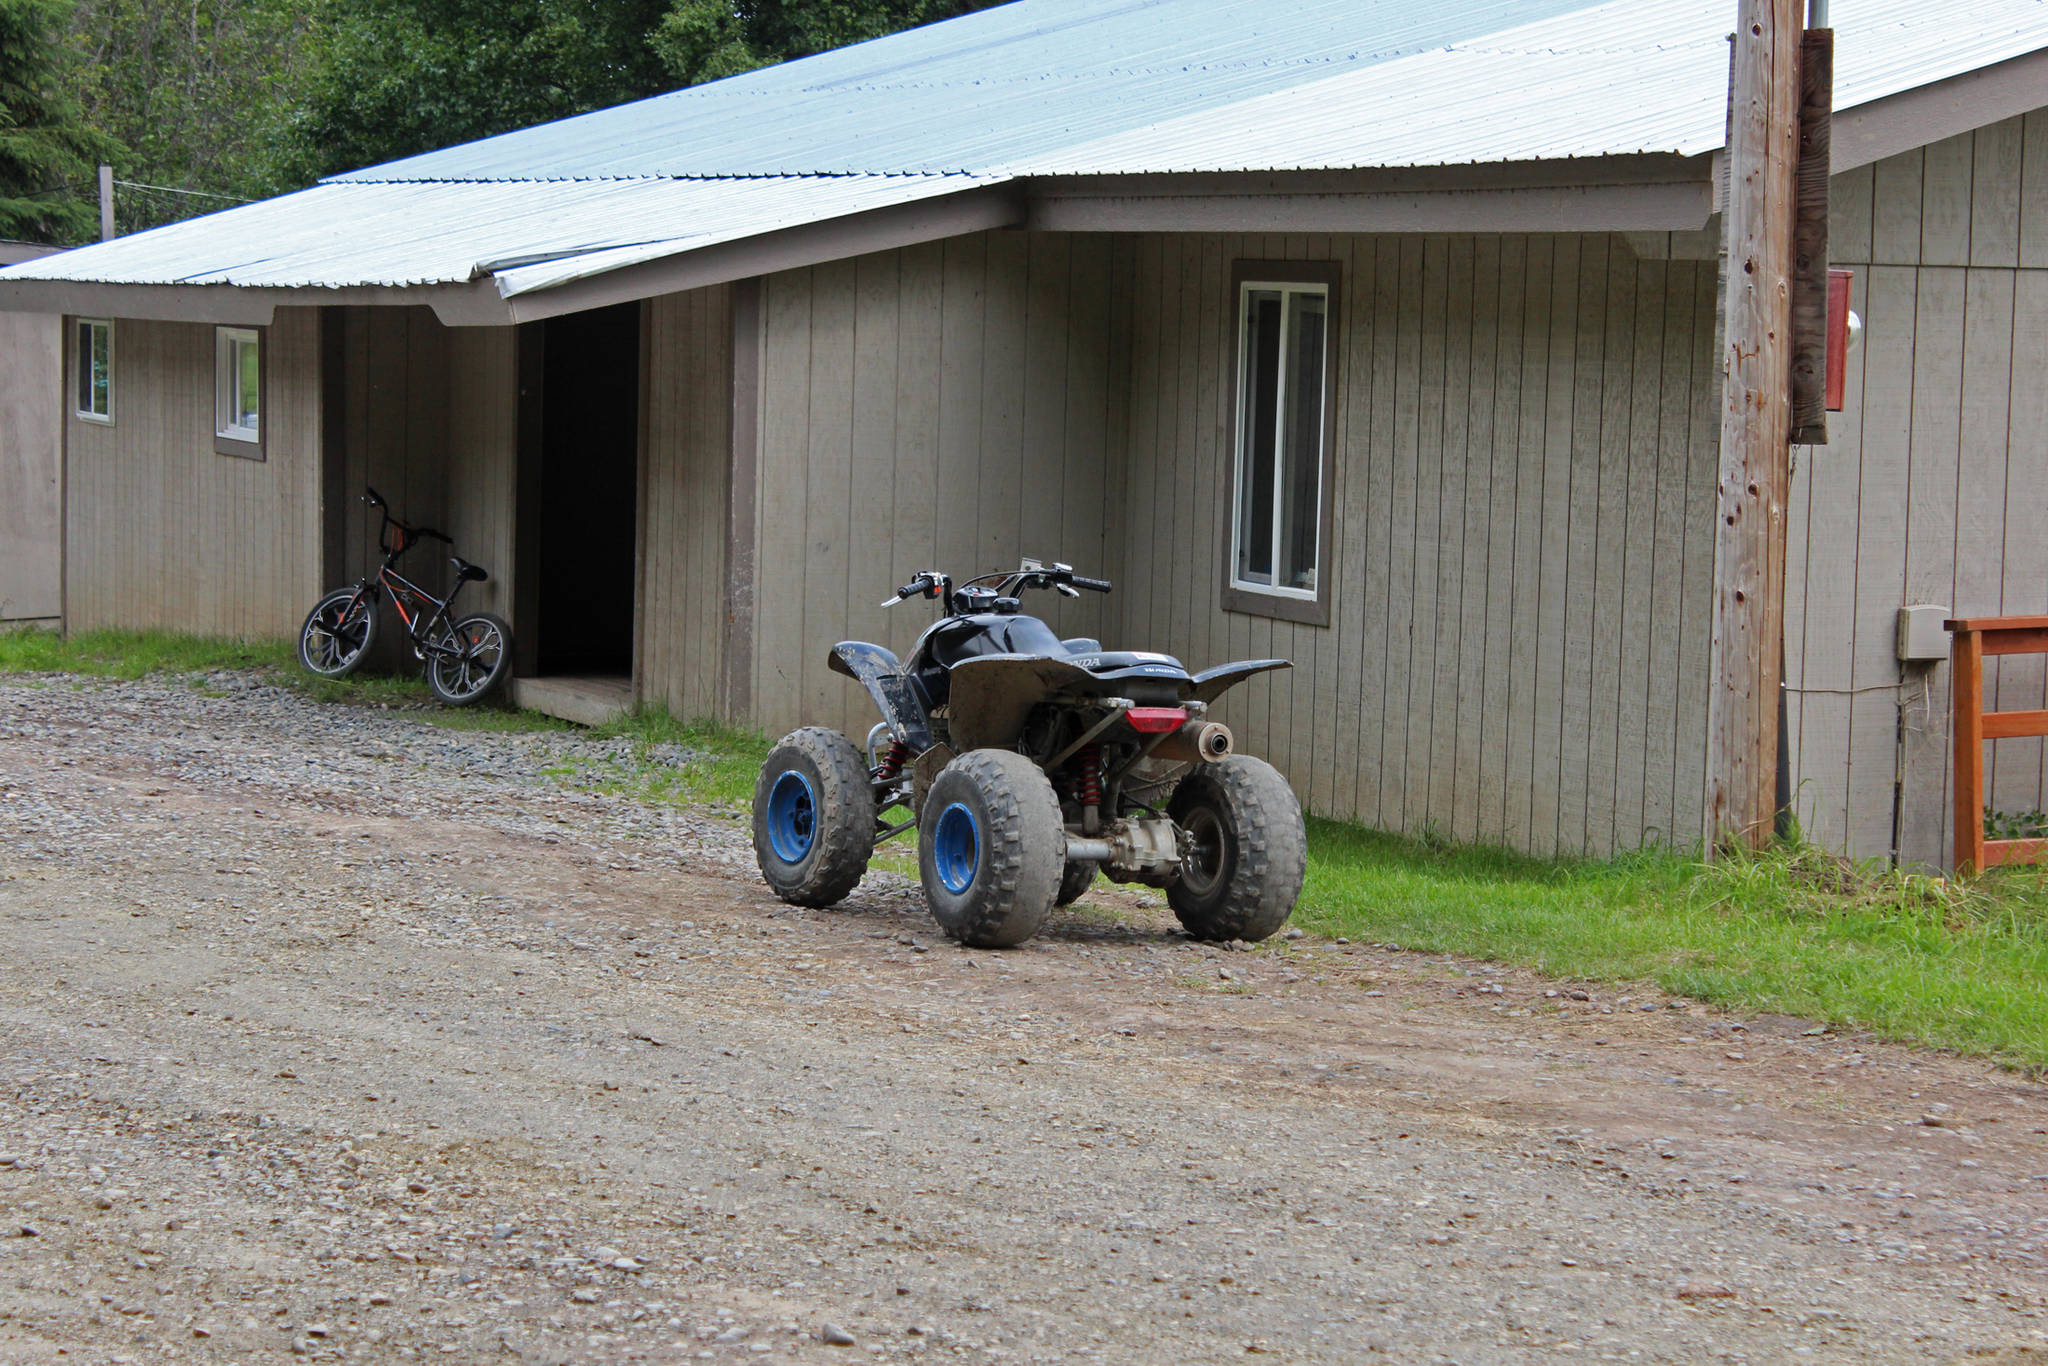 Bicycles and ATVs sit outside one of the two Kachemak Selo School buildings used to teach elementary school children Thursday, Aug. 30, 2018 in Kachemak Selo, Alaska. A grant program through the state would allow the Kenai Peninsula Borough to build a new, combined school facility for the students, as long as borough residents approve the borough to go out to bond for up to a $5 million bond when they vote in the October election. (Photo by Megan Pacer/Homer News)